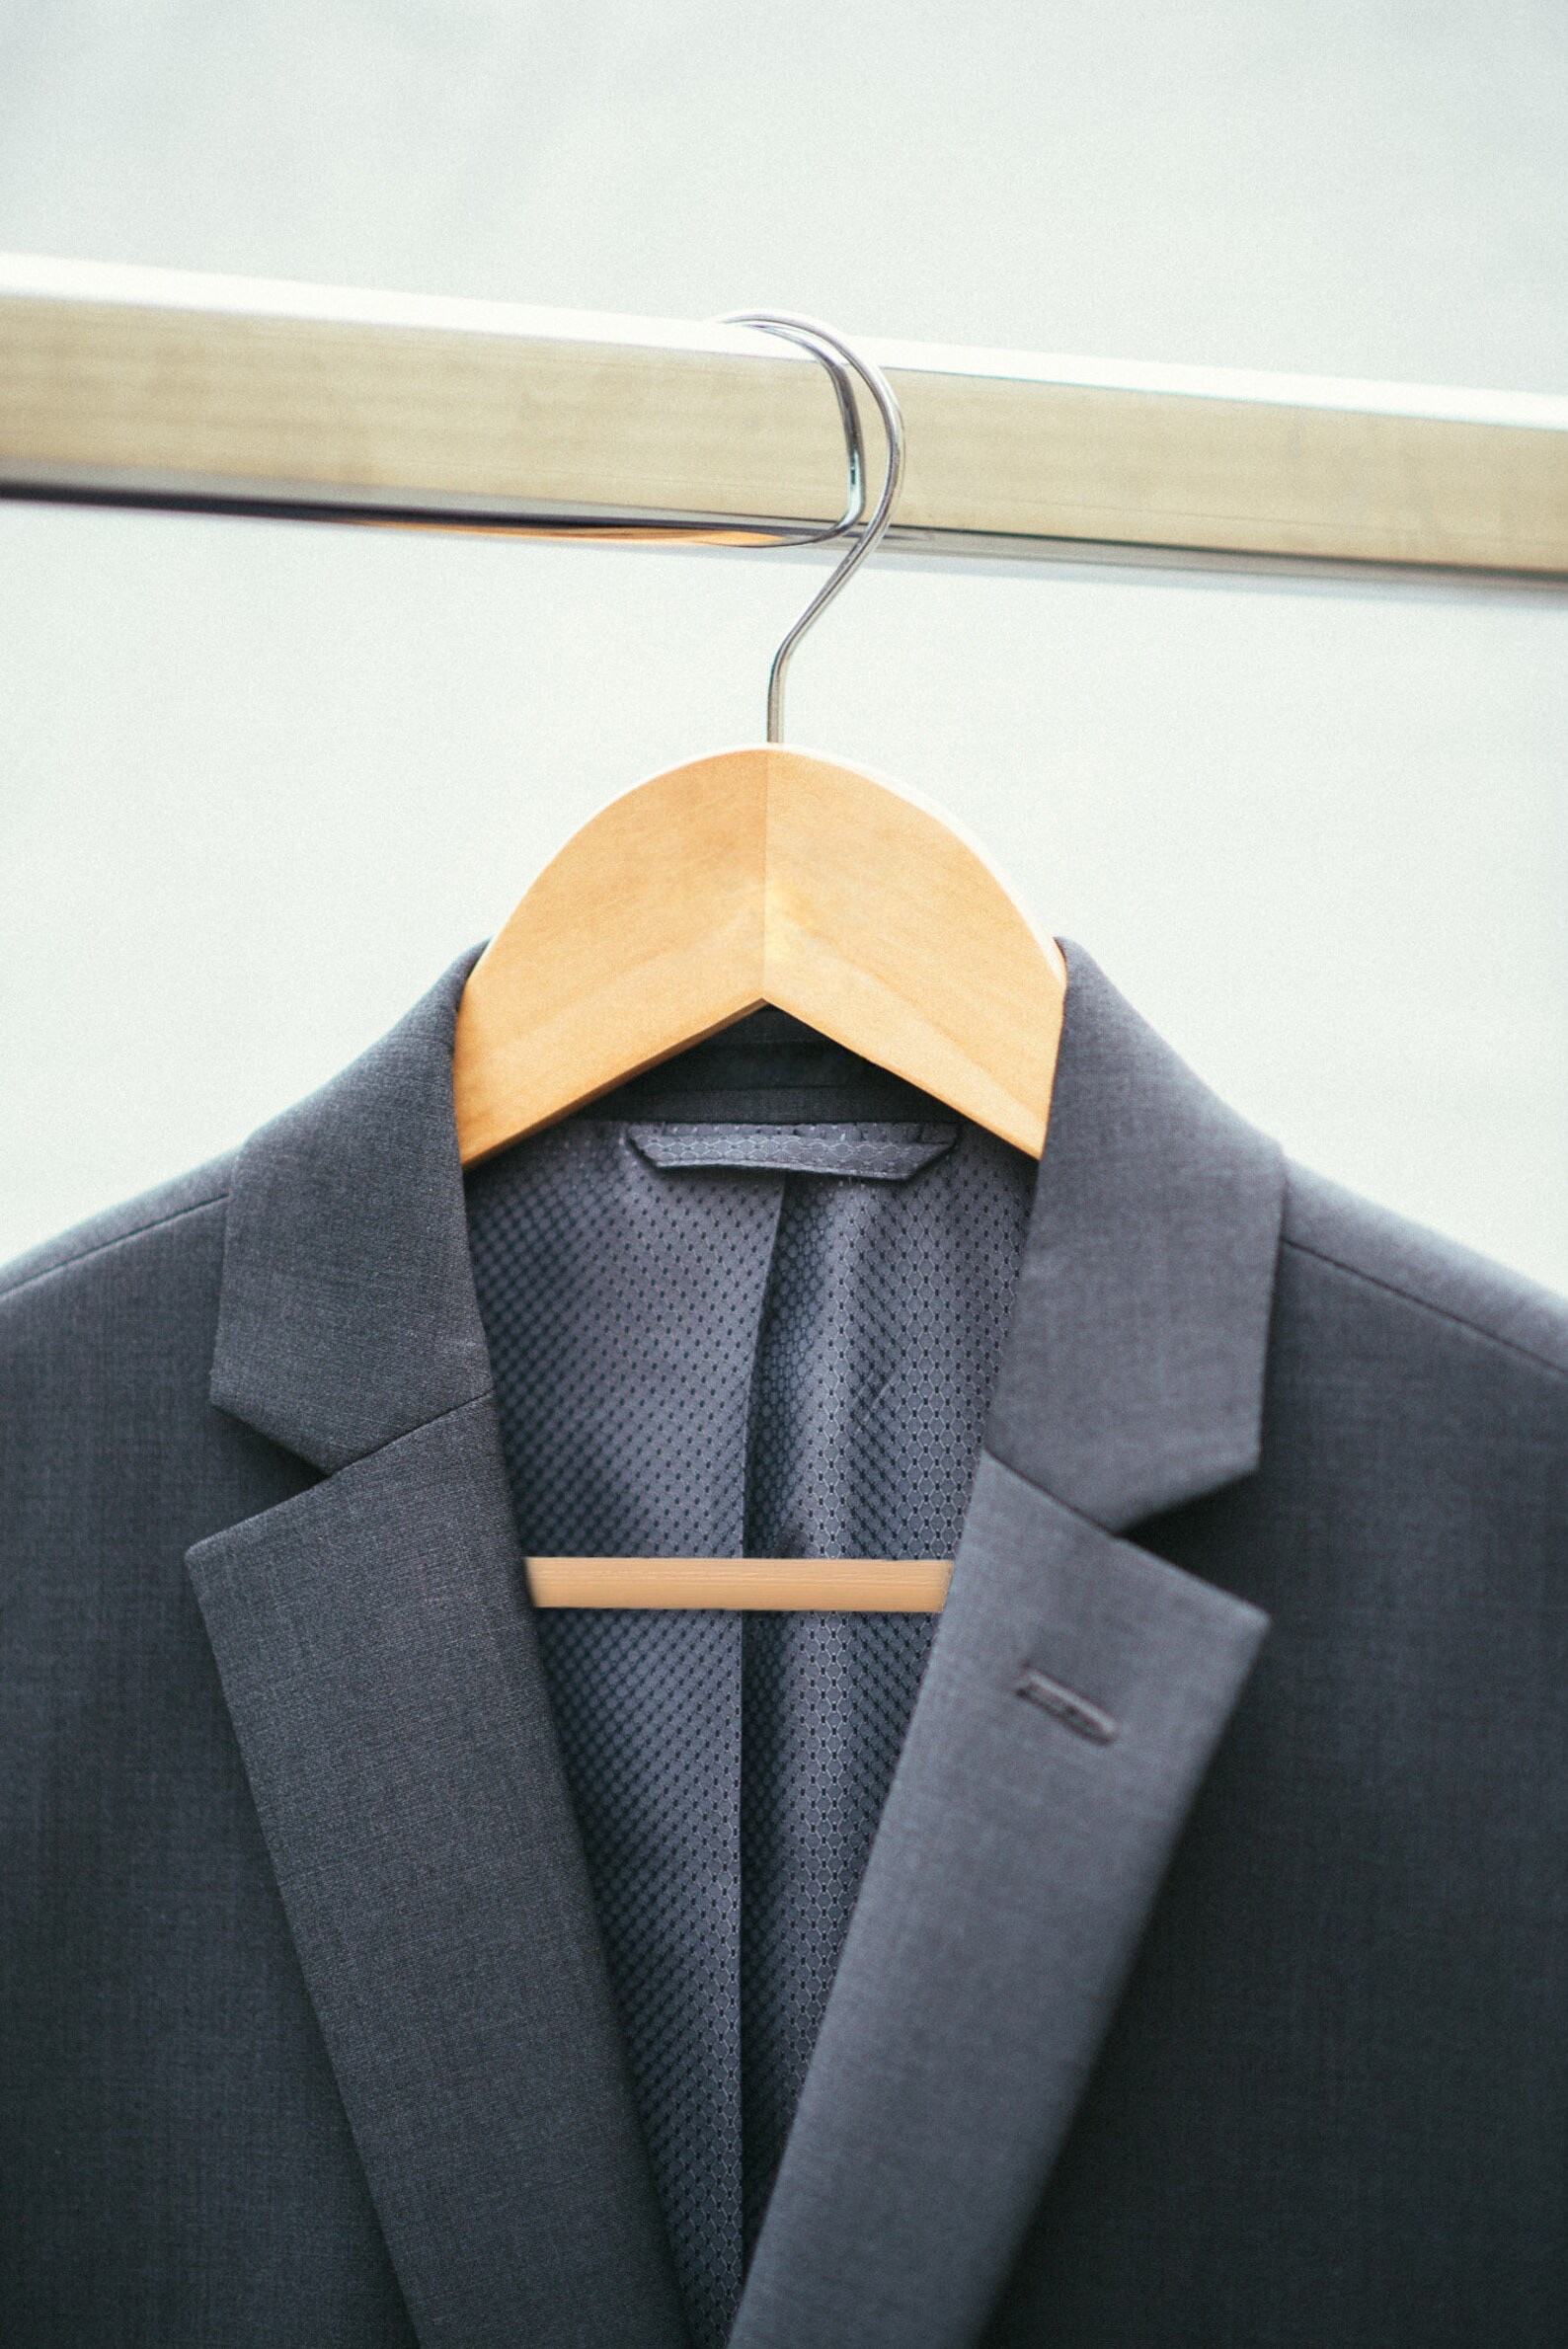 Natural Wooden Flat Suit Hanger for adults hanging on a rack with a men’s navy suit jacket hanging on it